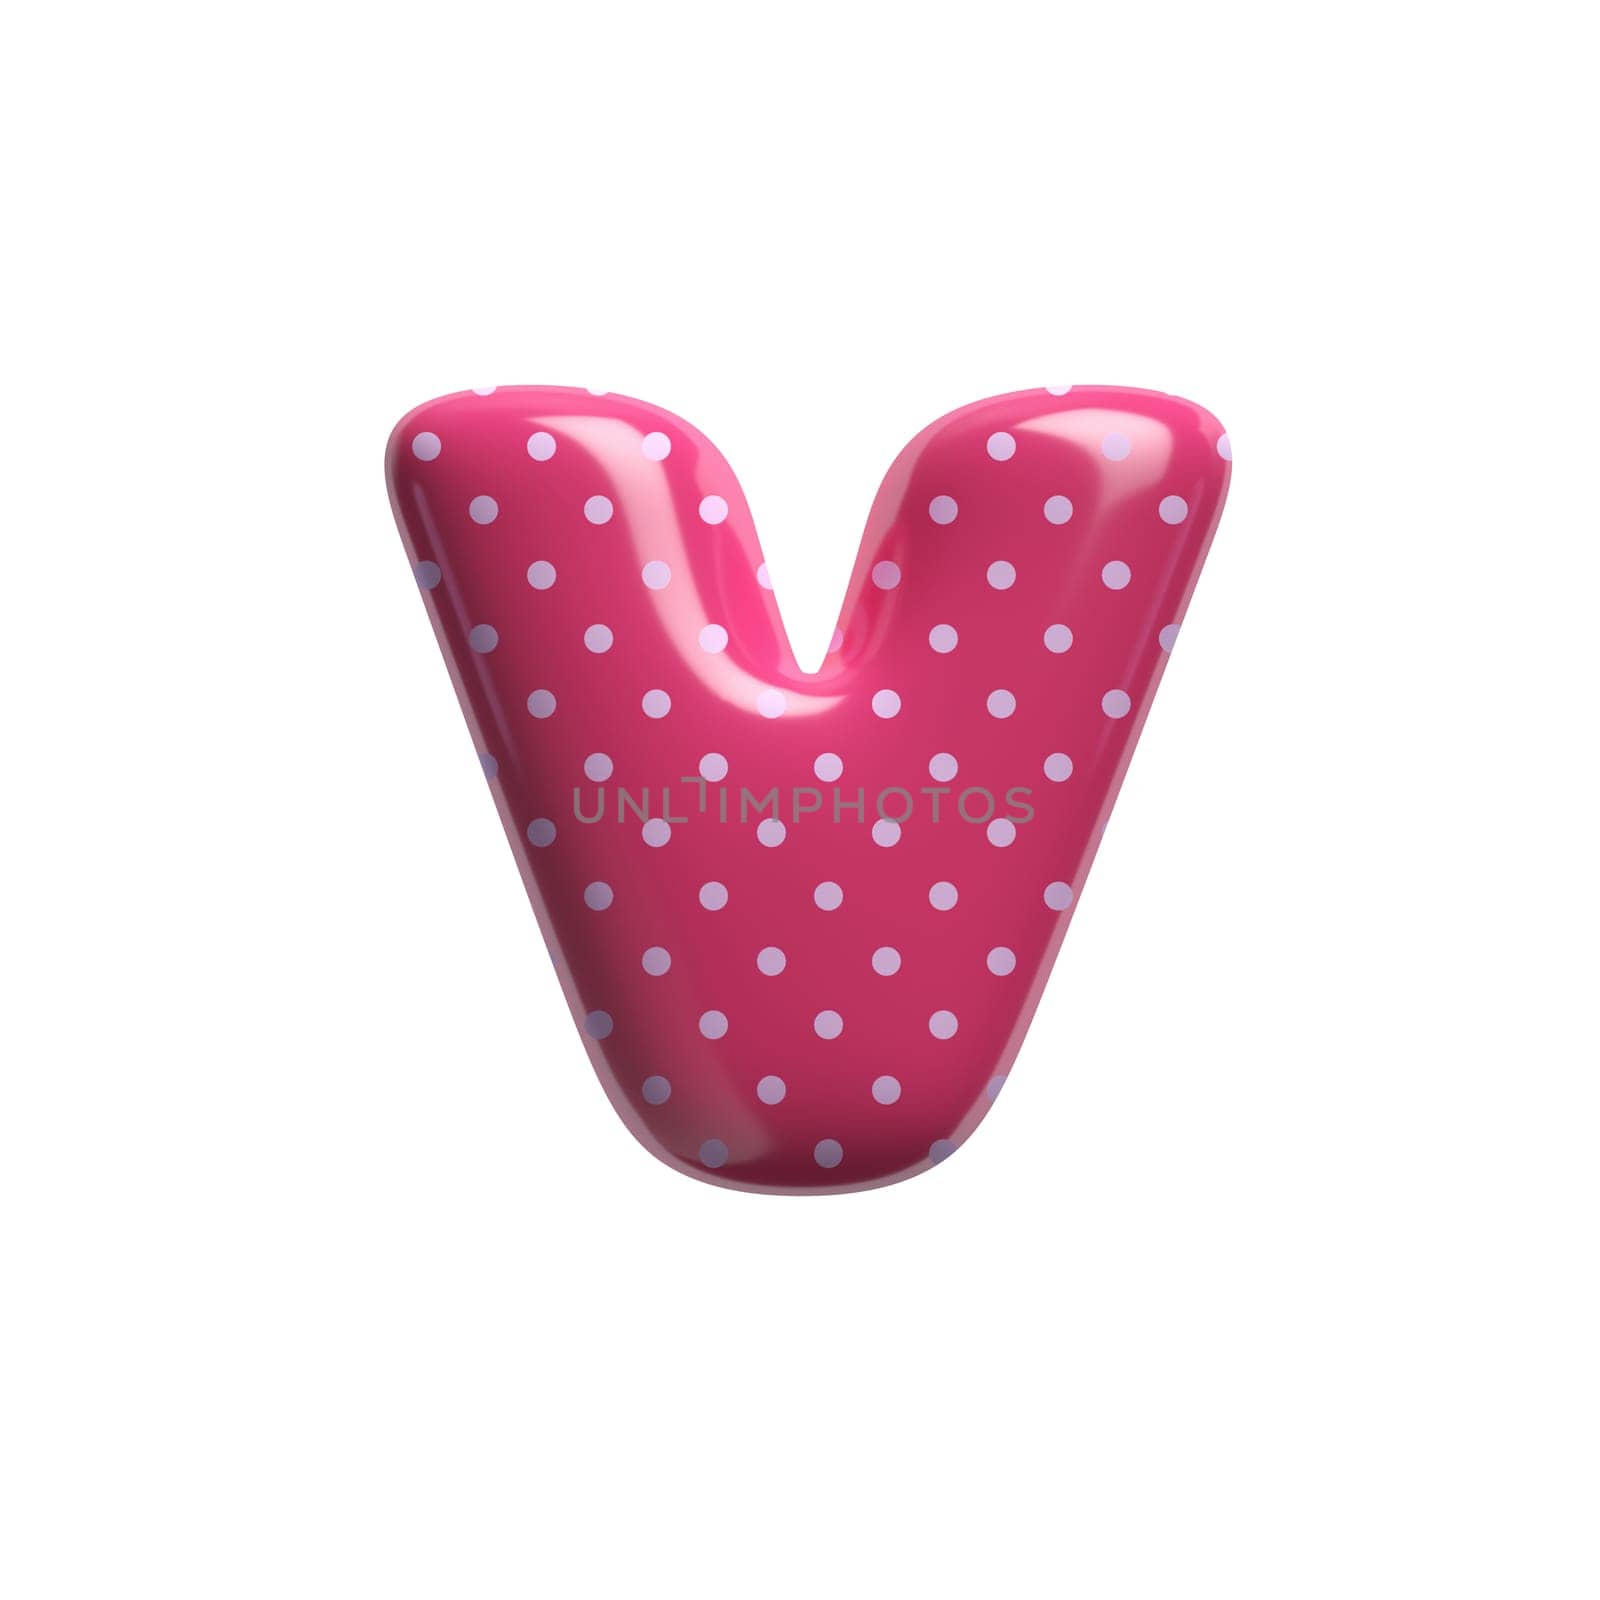 Polka dot letter V - Small 3d pink retro font - Suitable for Fashion, retro design or decoration related subjects by chrisroll